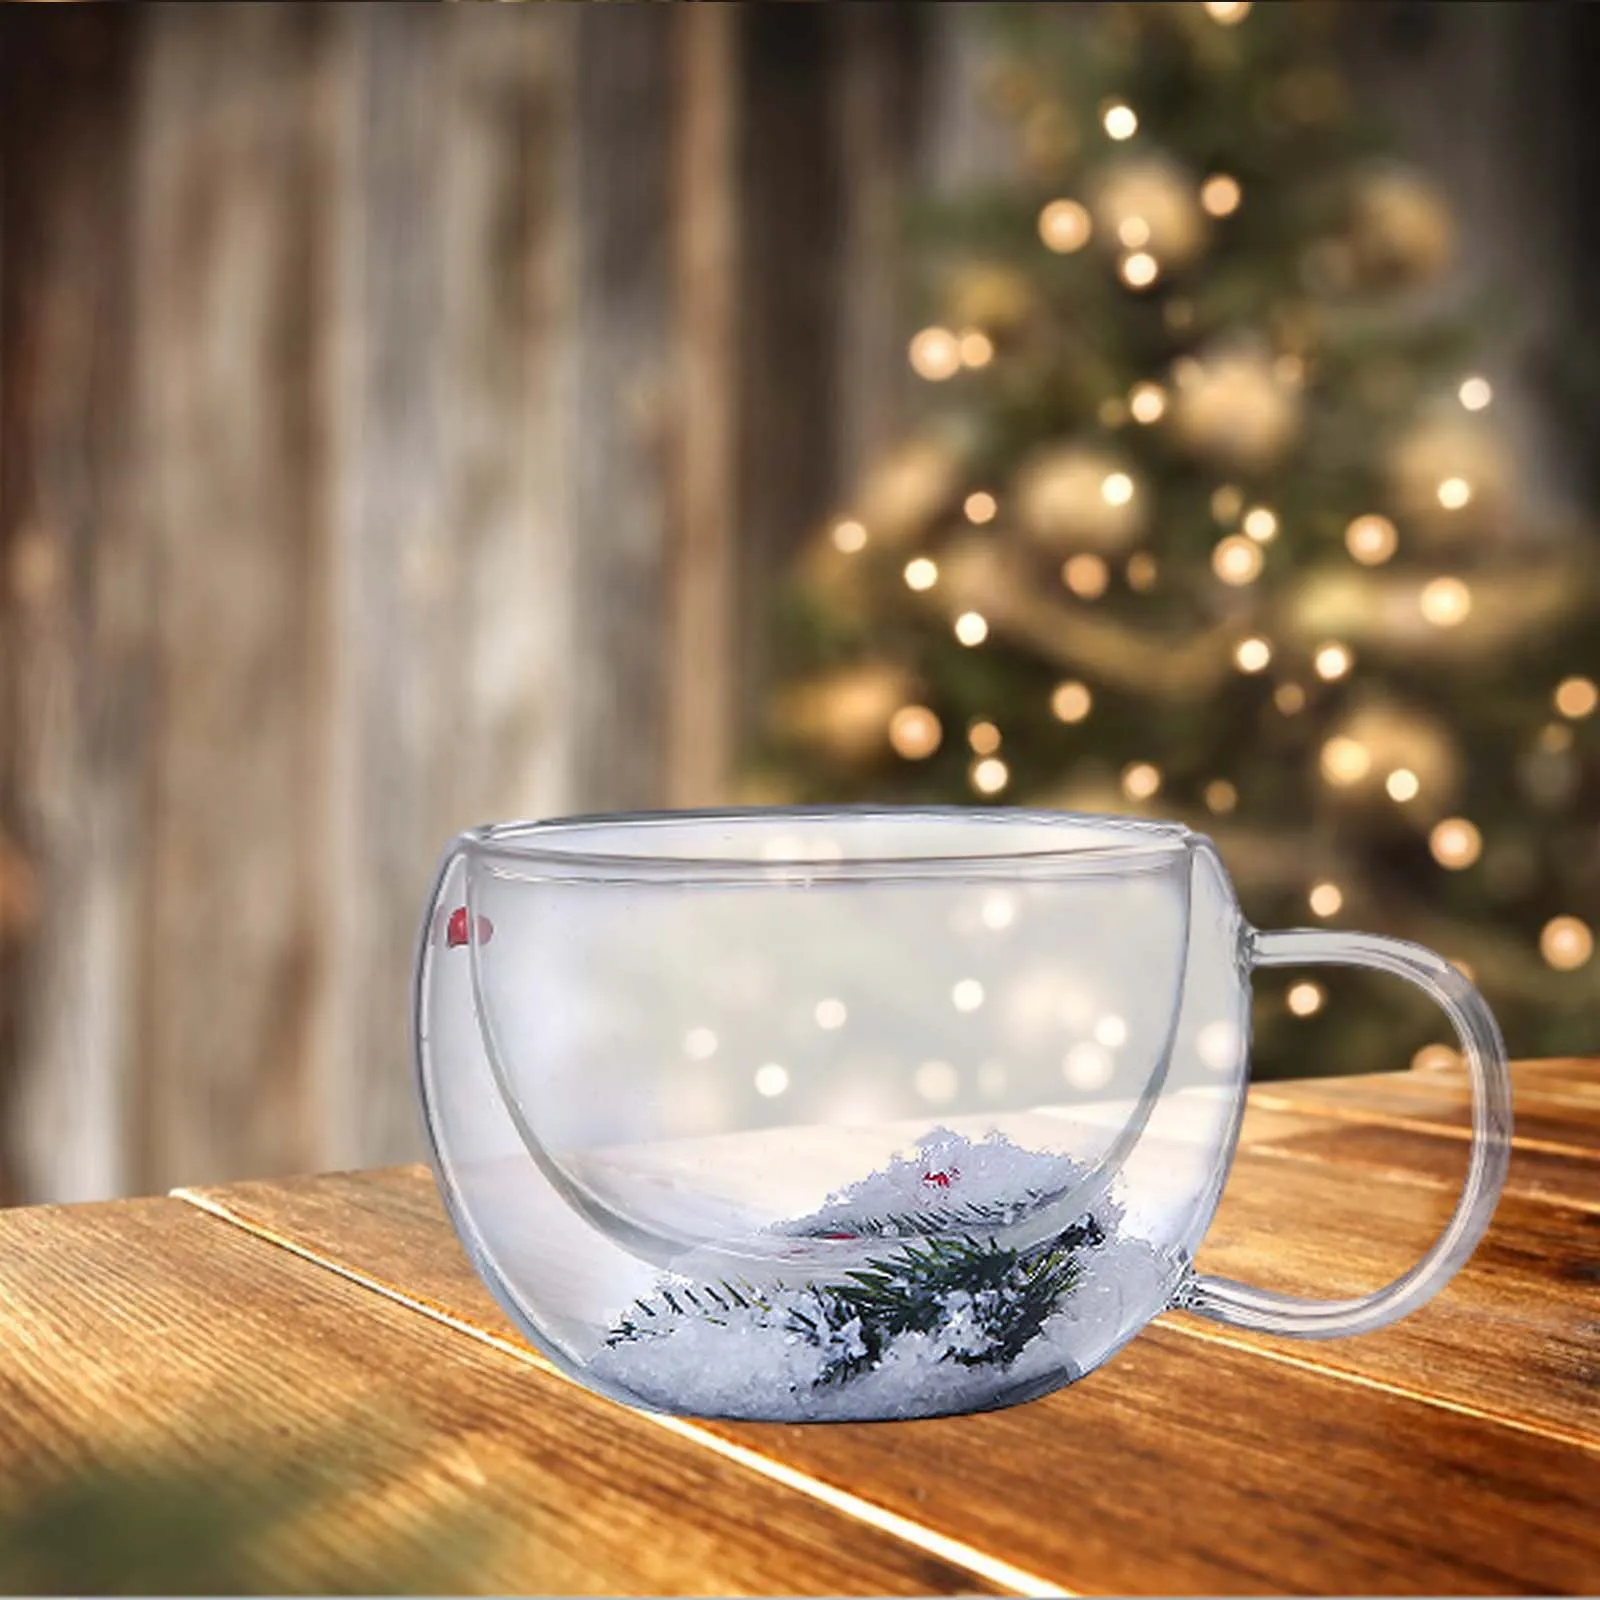 https://ae01.alicdn.com/kf/S8341532106e64a18911d1cae76e63386w/Heat-resistant-Borosilicate-Double-layer-Glass-Household-Milk-Juice-Cup-Transparent-Christmas-Snowflake-Insulated-Coffee-Cup.jpg